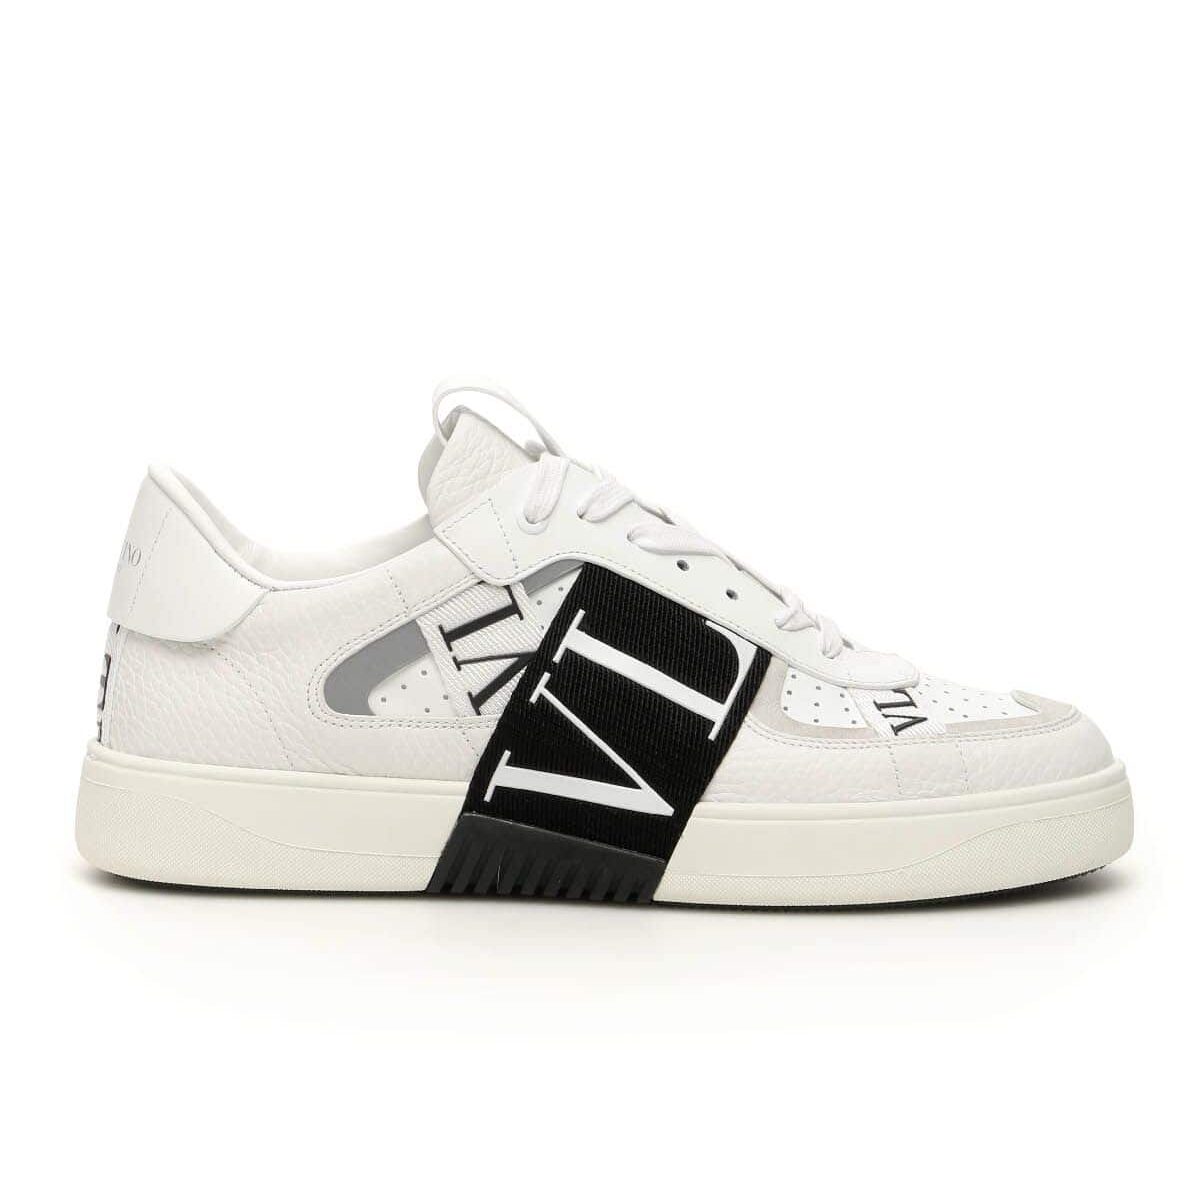 retreat Pounding Experiment VALENTINO GARAVANI low-top calfskin VL7N sneaker with bands ⋆ Couturier